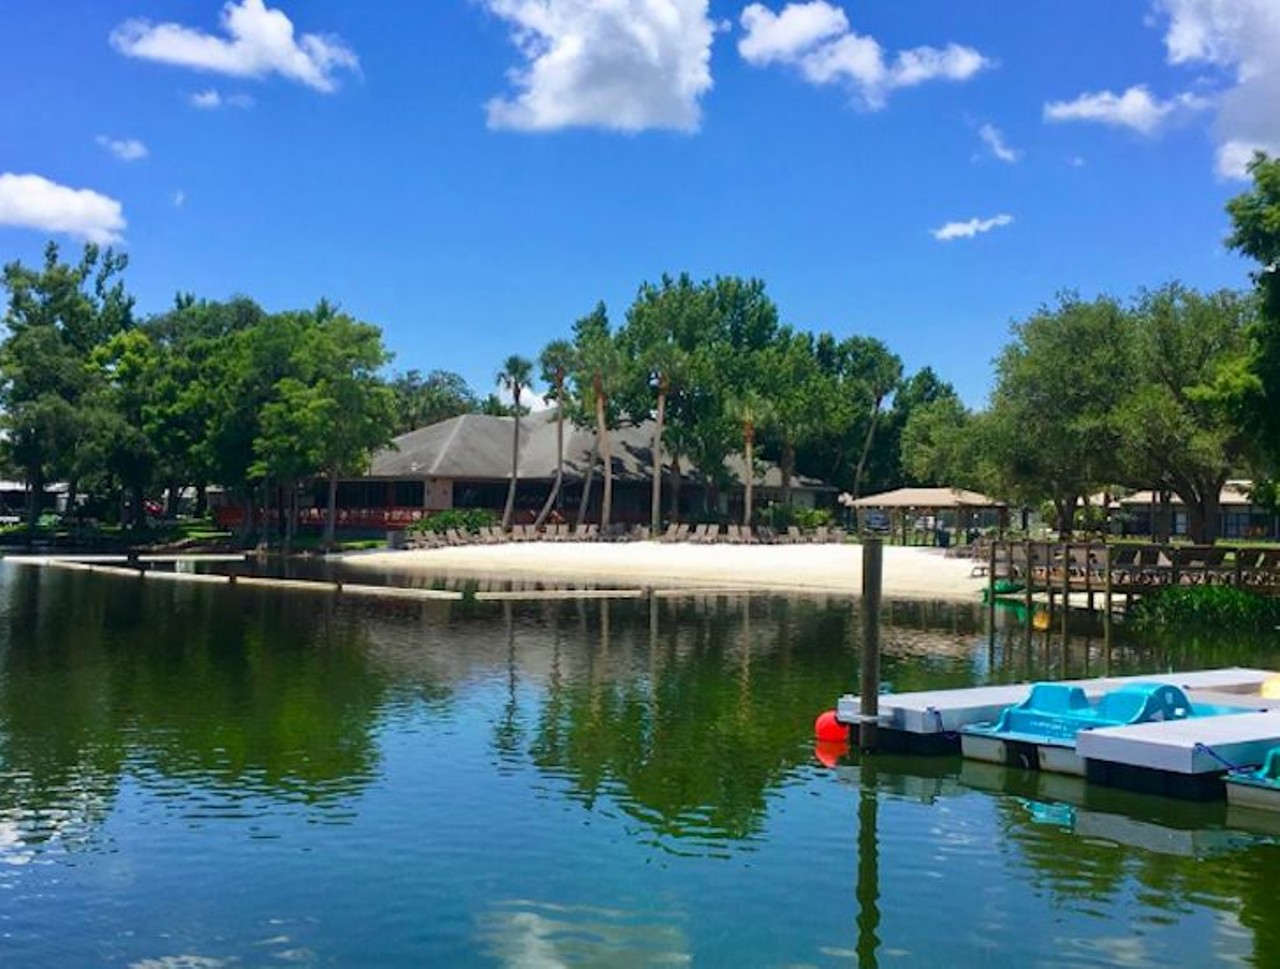 Ditch the bathing suit at Cypress Cove
4425 Pleasant Hill Rd, Kissimmee, FL (407) 933-5870 
Does the summer heat have you wanting to strip it all off? Well, lucky for you, you can the the Cypress Cove Nudist Resort. Enjoy the pool area for only $5 if you&#146;re under 35 years old. There is also lake access and breathtaking sunset and sunrise views. 
Photo via Cypress Cove Nudist Resort/Facebook